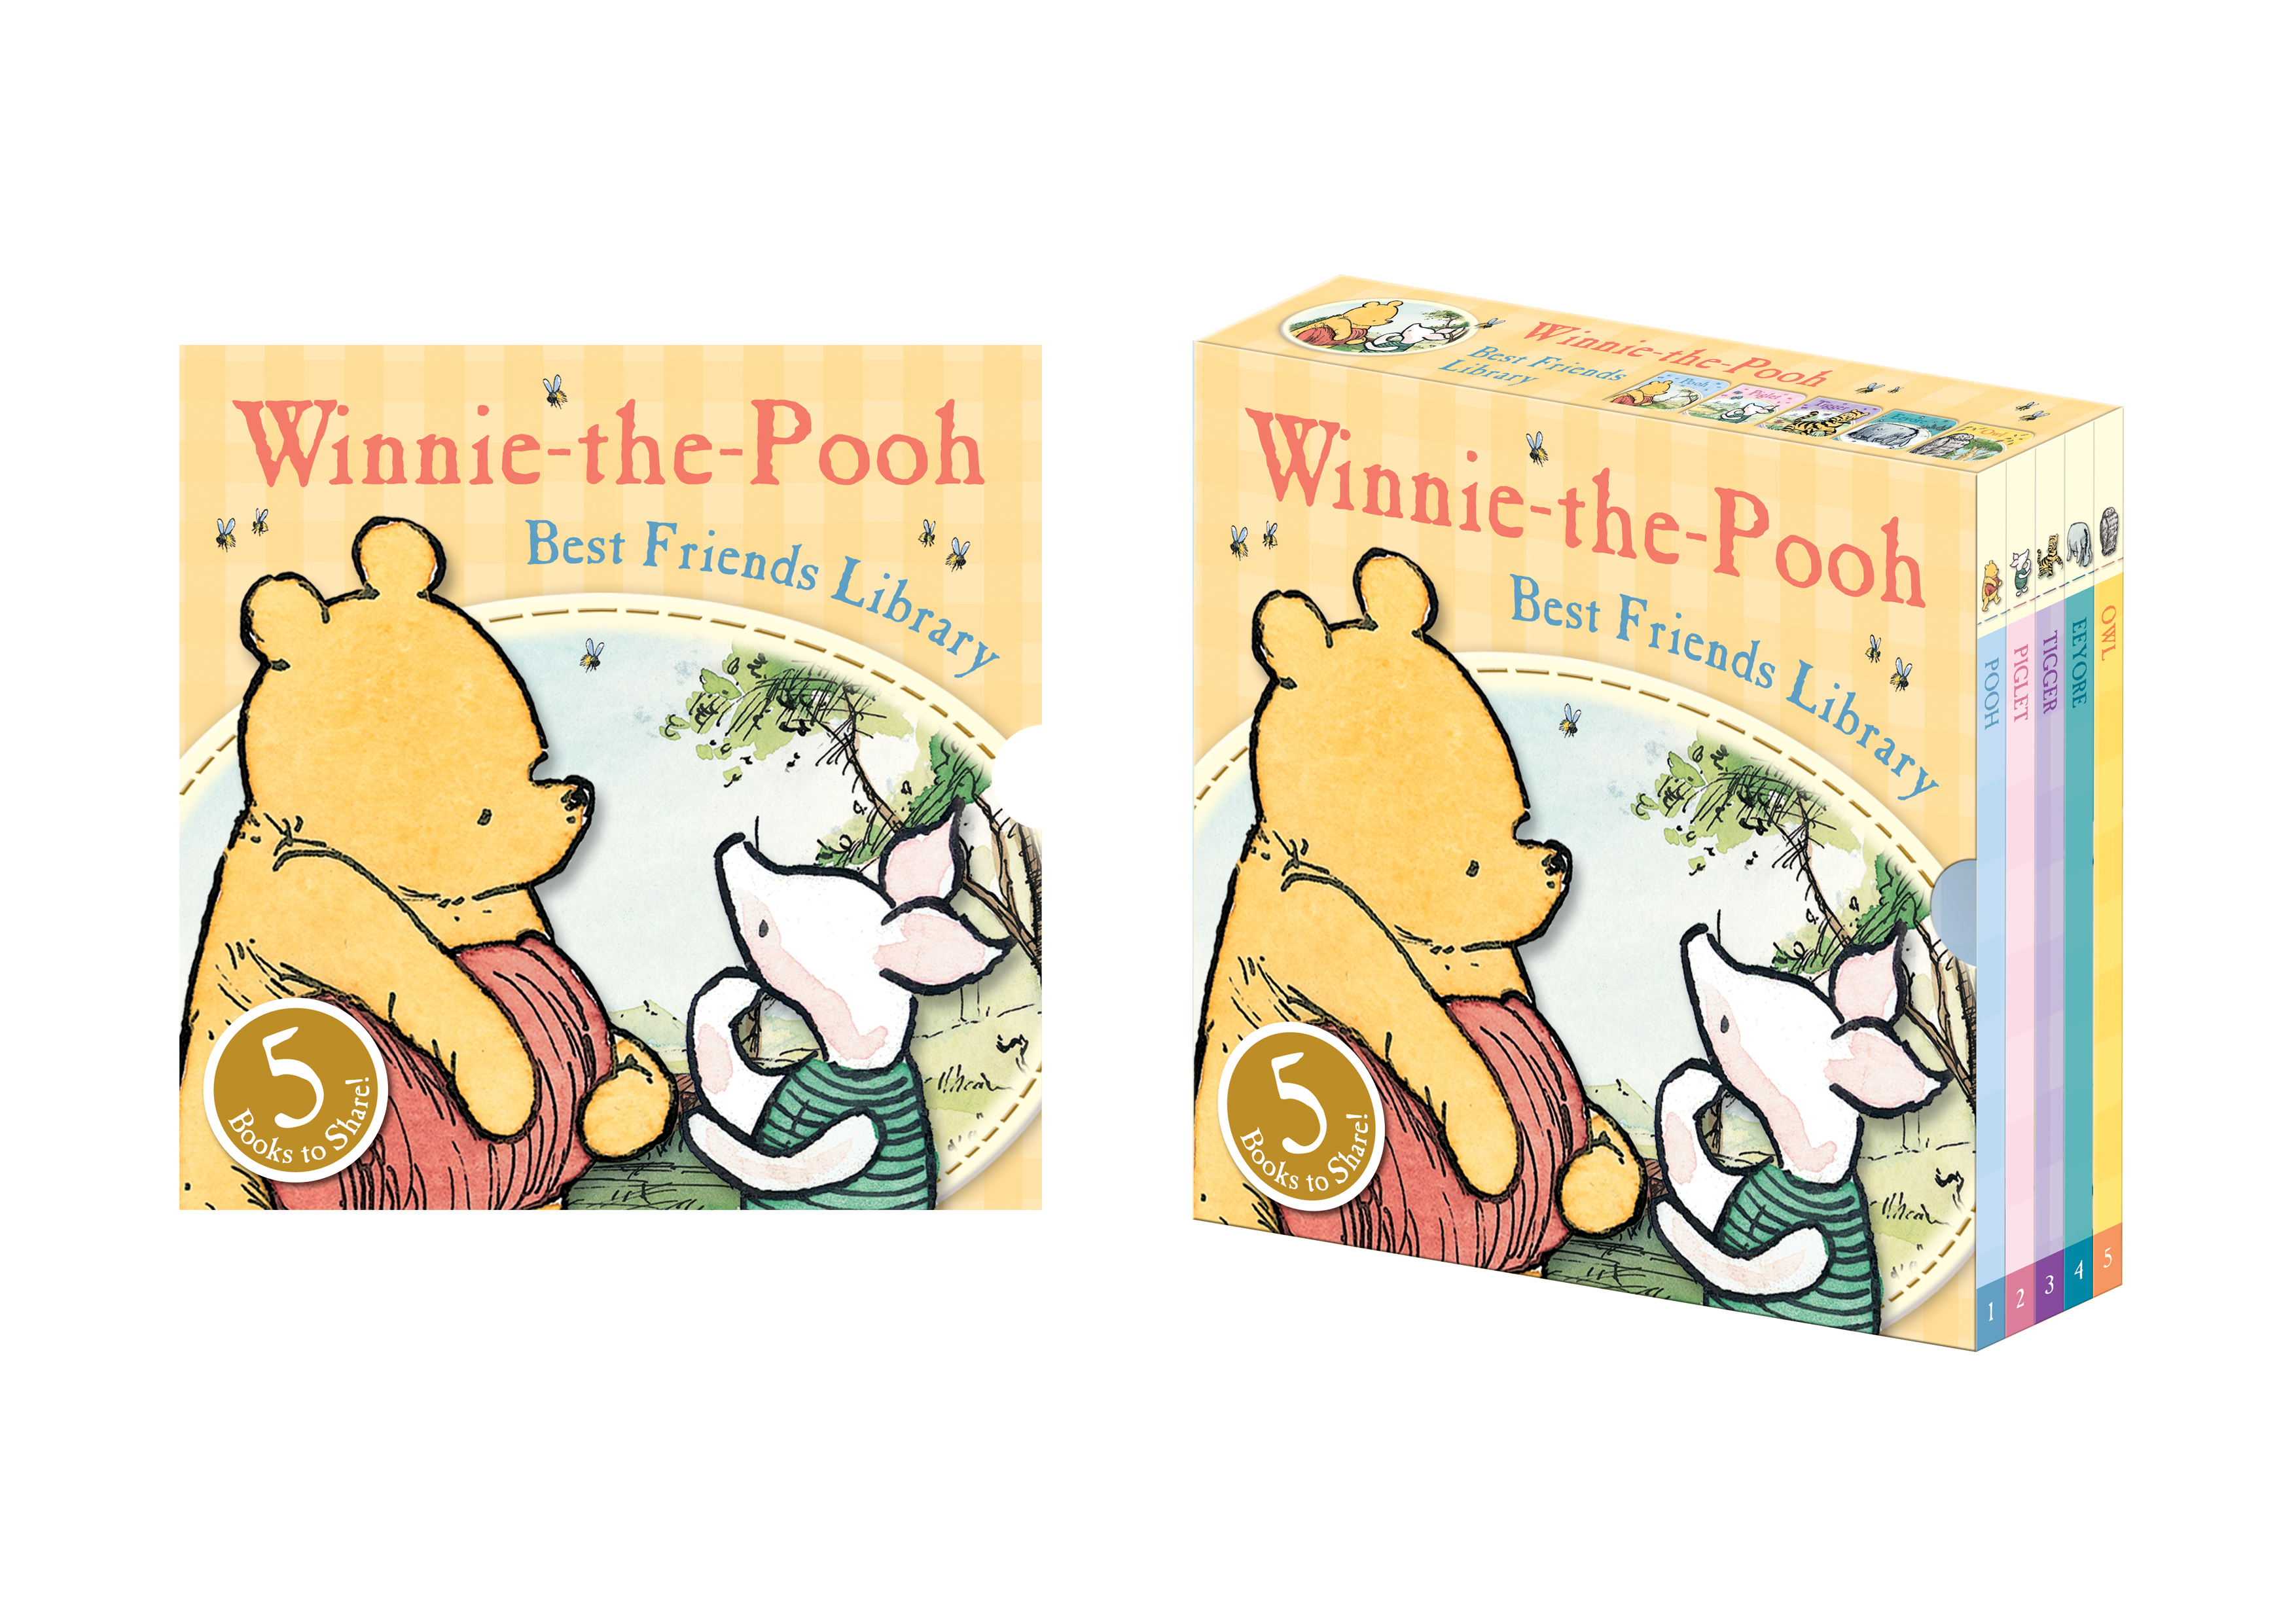 Winnie-the-Pooh Best Friends Library